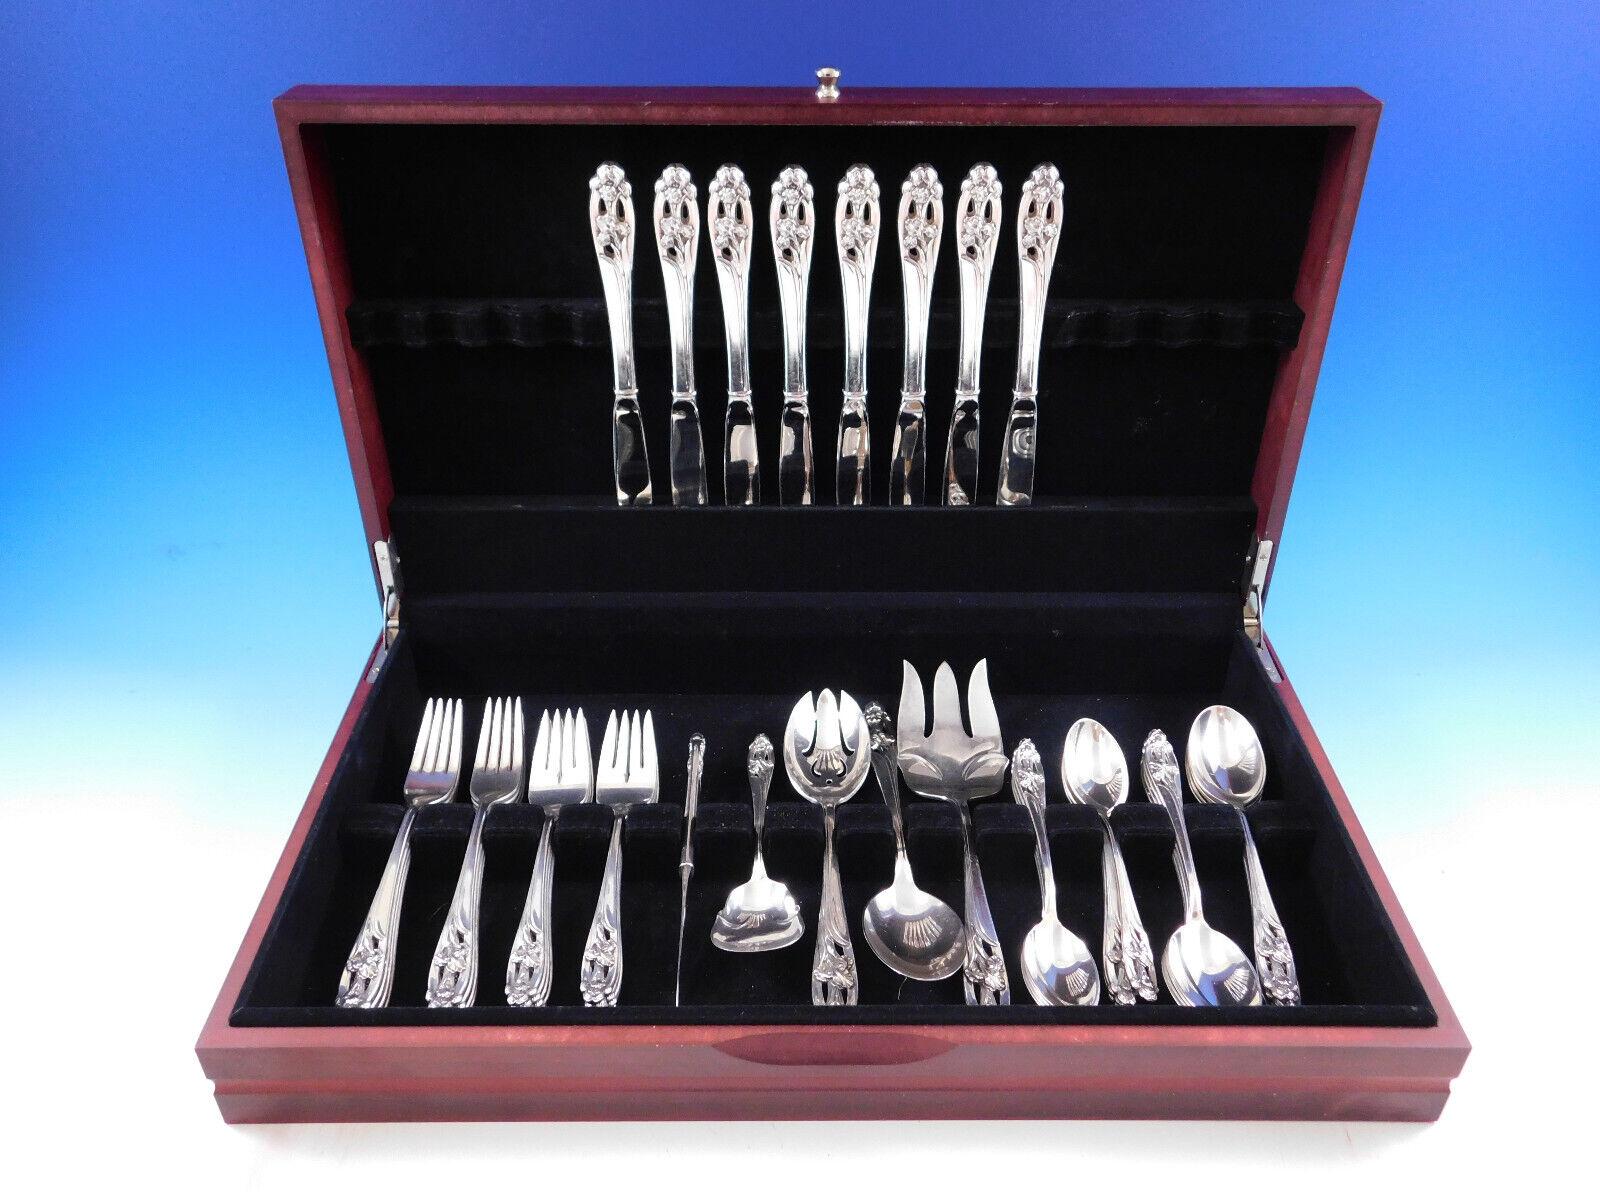 Gorgeous Silver Iris by International sterling silver flatware set with pierced handles and high relief iris detailing - 45 pieces. This set includes:
8 Knives, 9 1/4